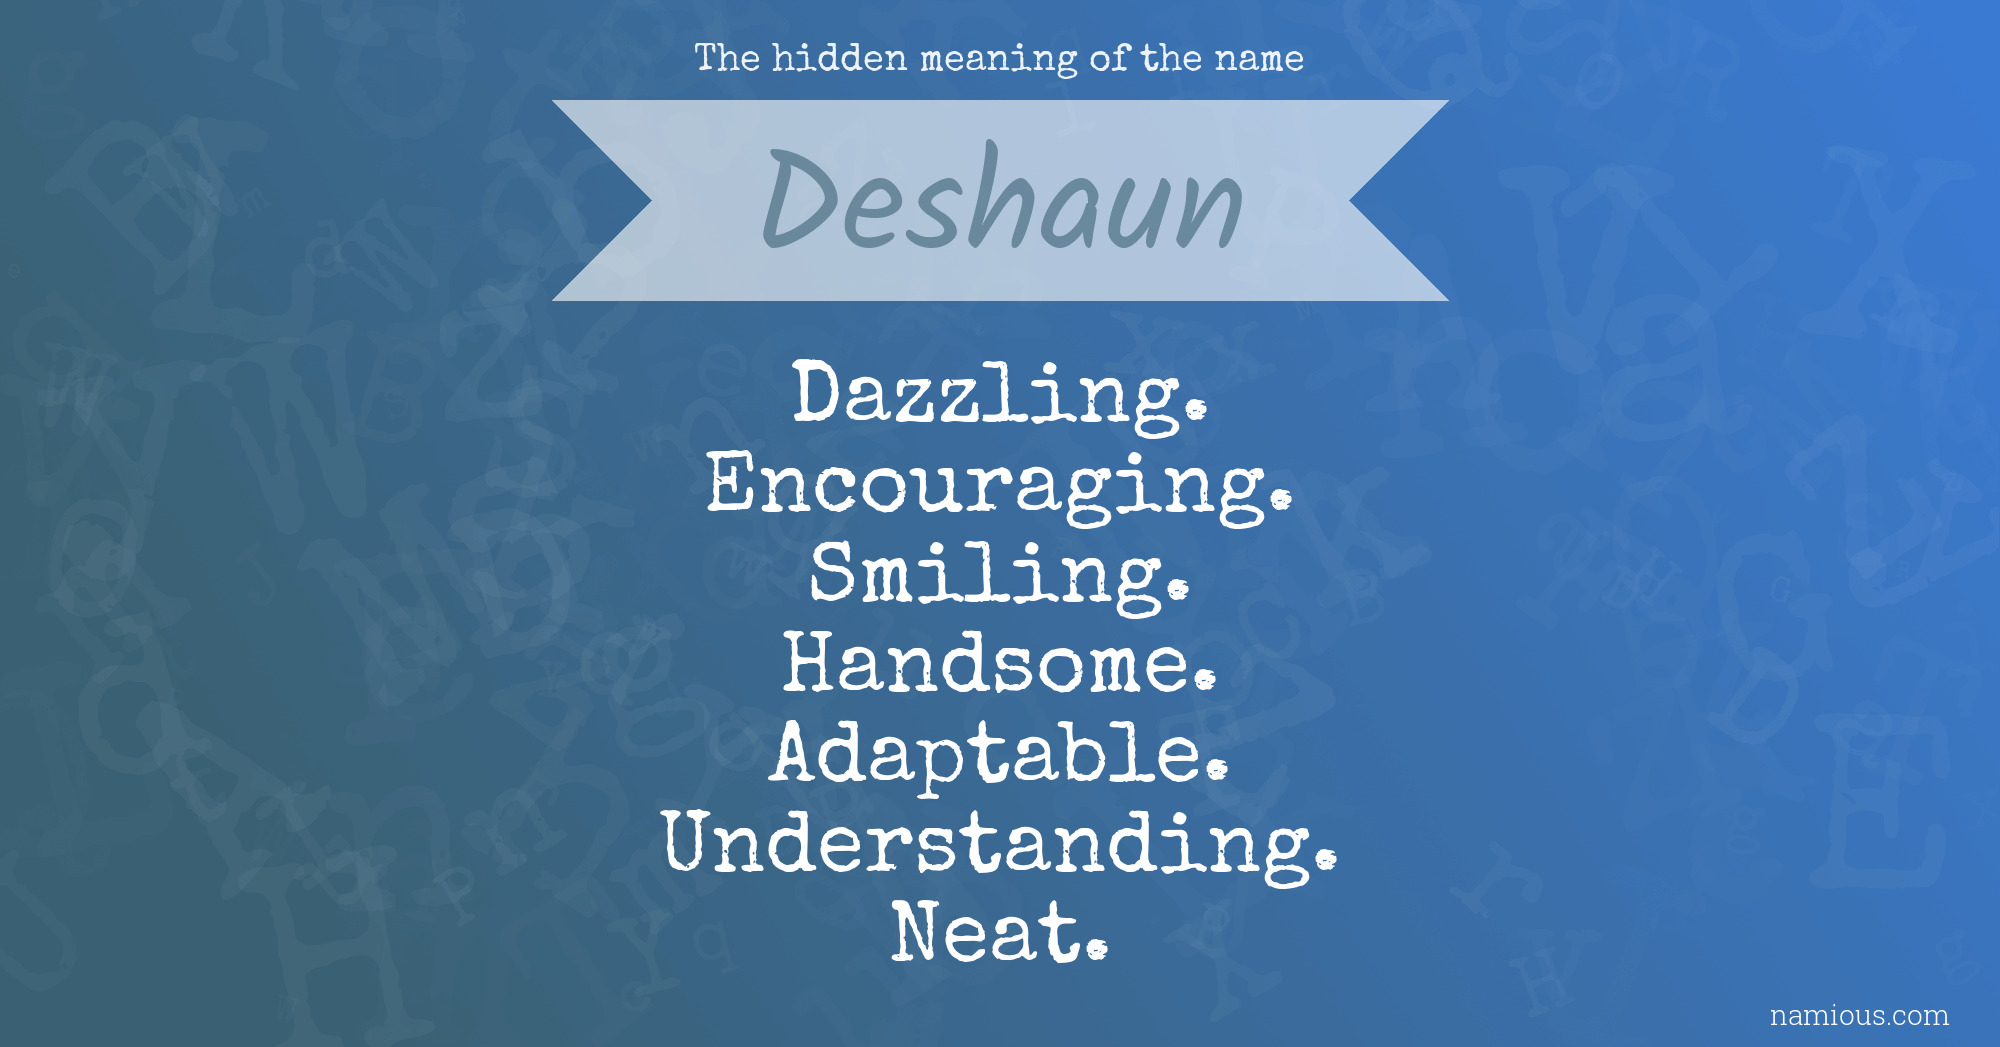 The hidden meaning of the name Deshaun